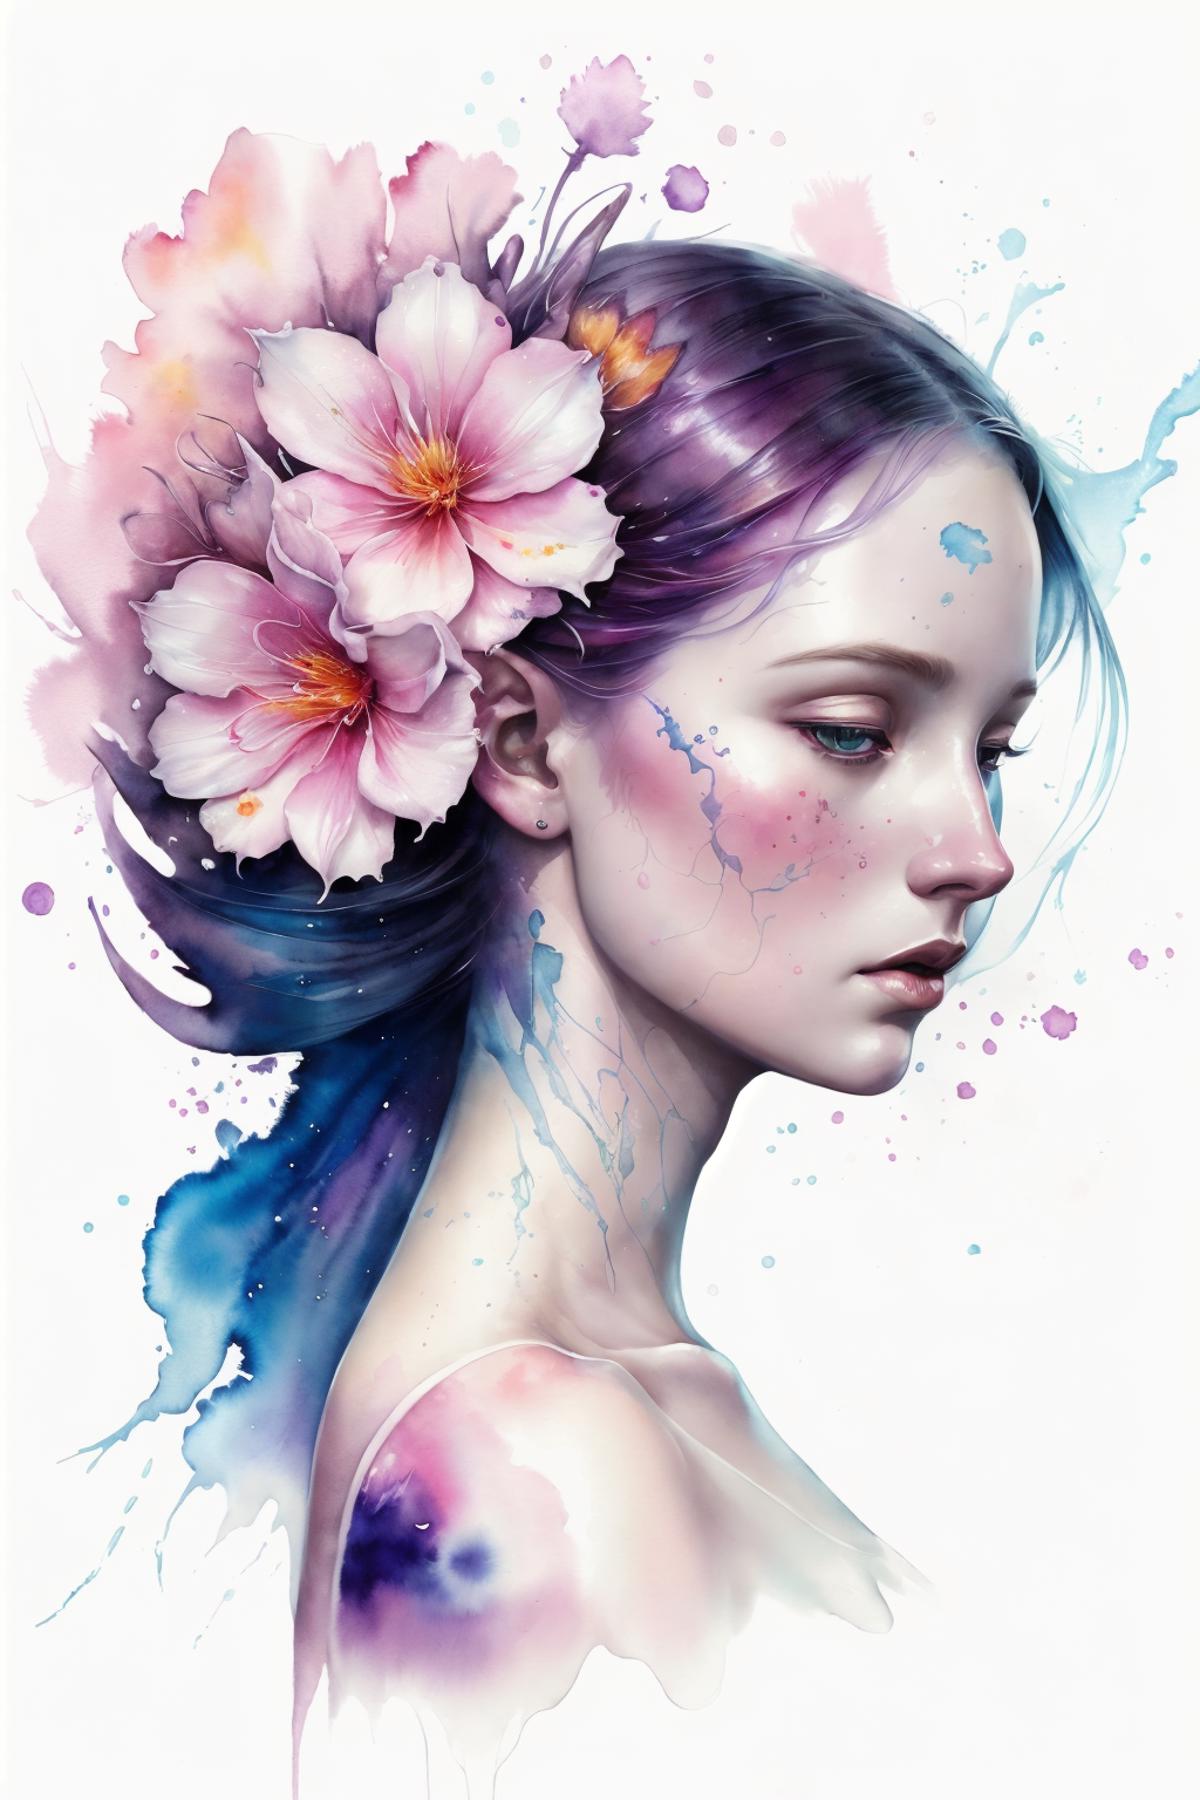 A Painted Portrait of a Woman with Purple Hair and Flowers in Her Hair.